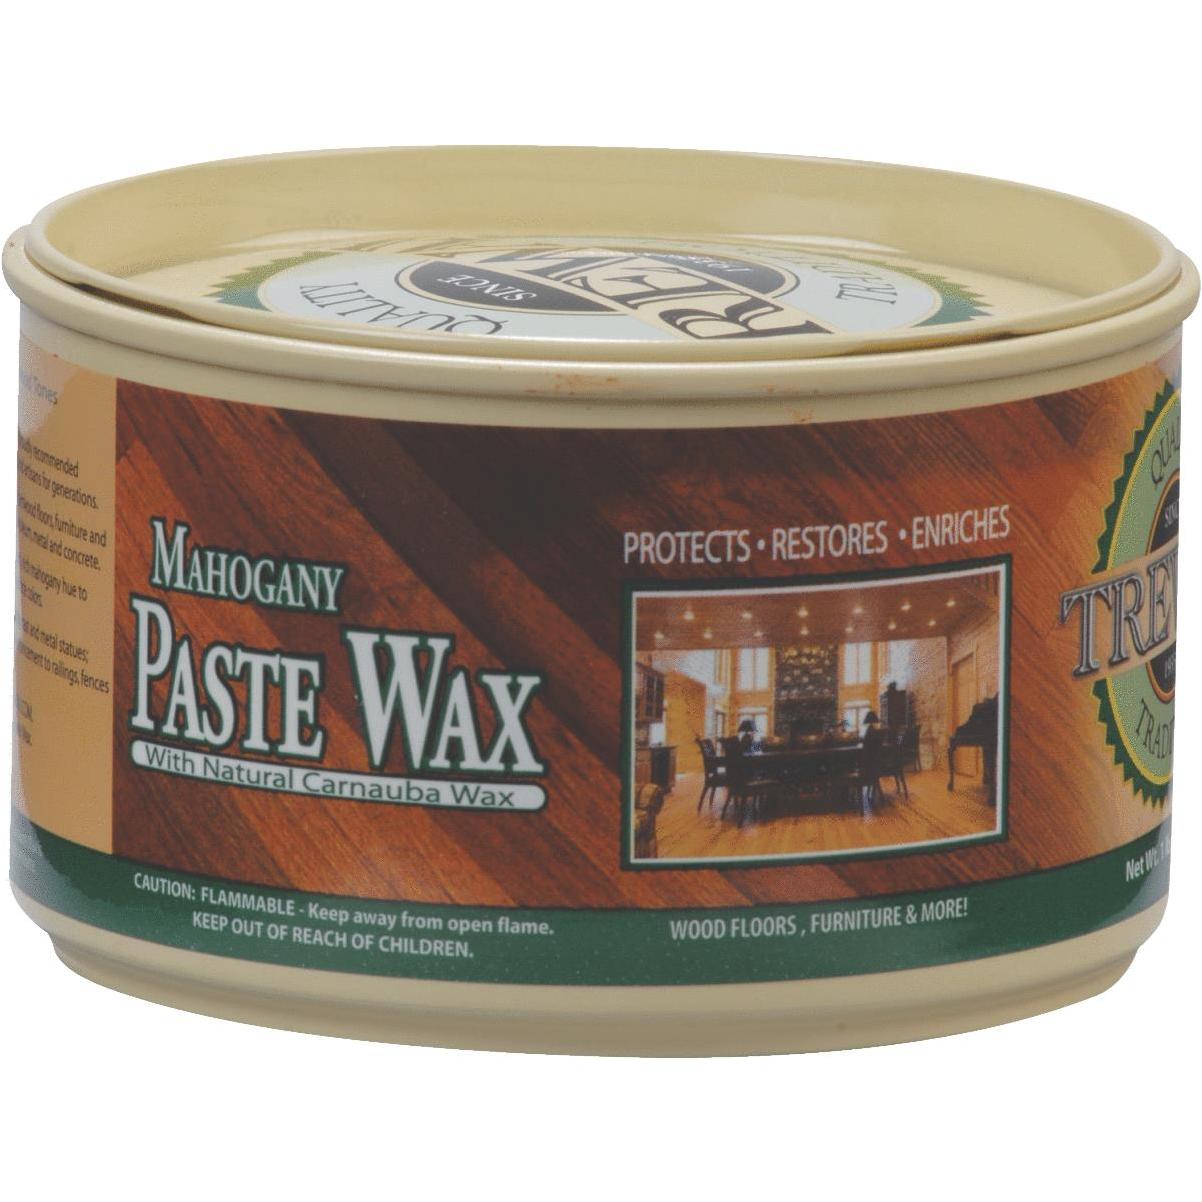 Lundmark Clear Paste Wax Hand Rubbed Old World Floor Wax Paste 16 oz.